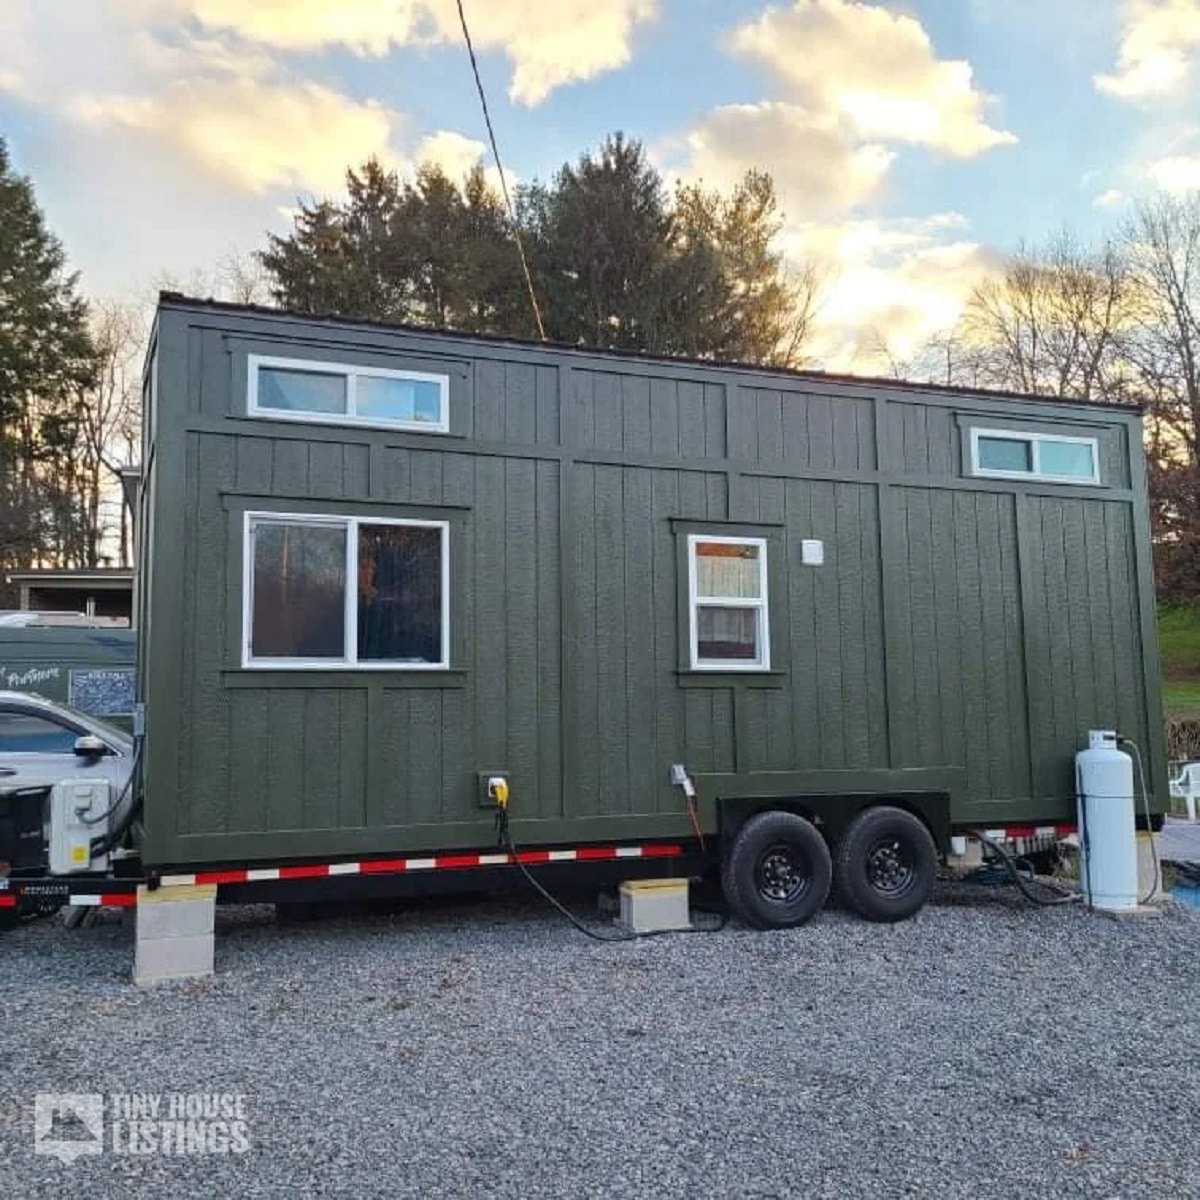 Wild olive green tiny home on wheels